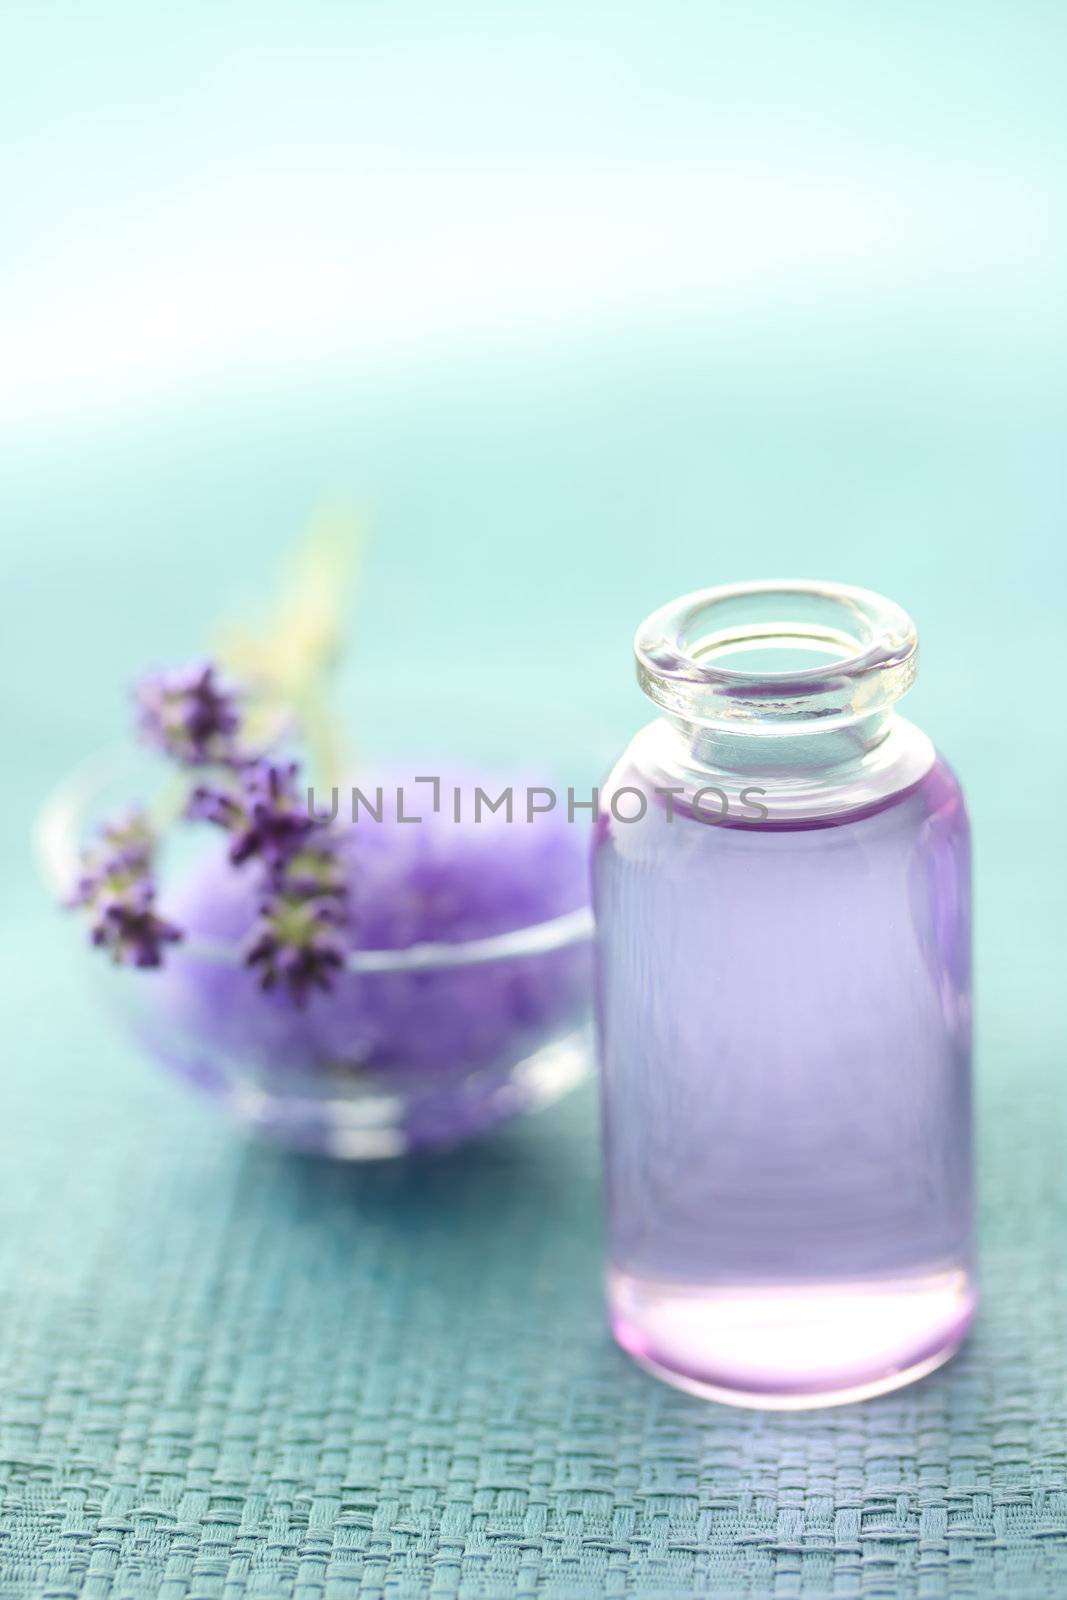 Aromatherapy oil and lavender by melpomene